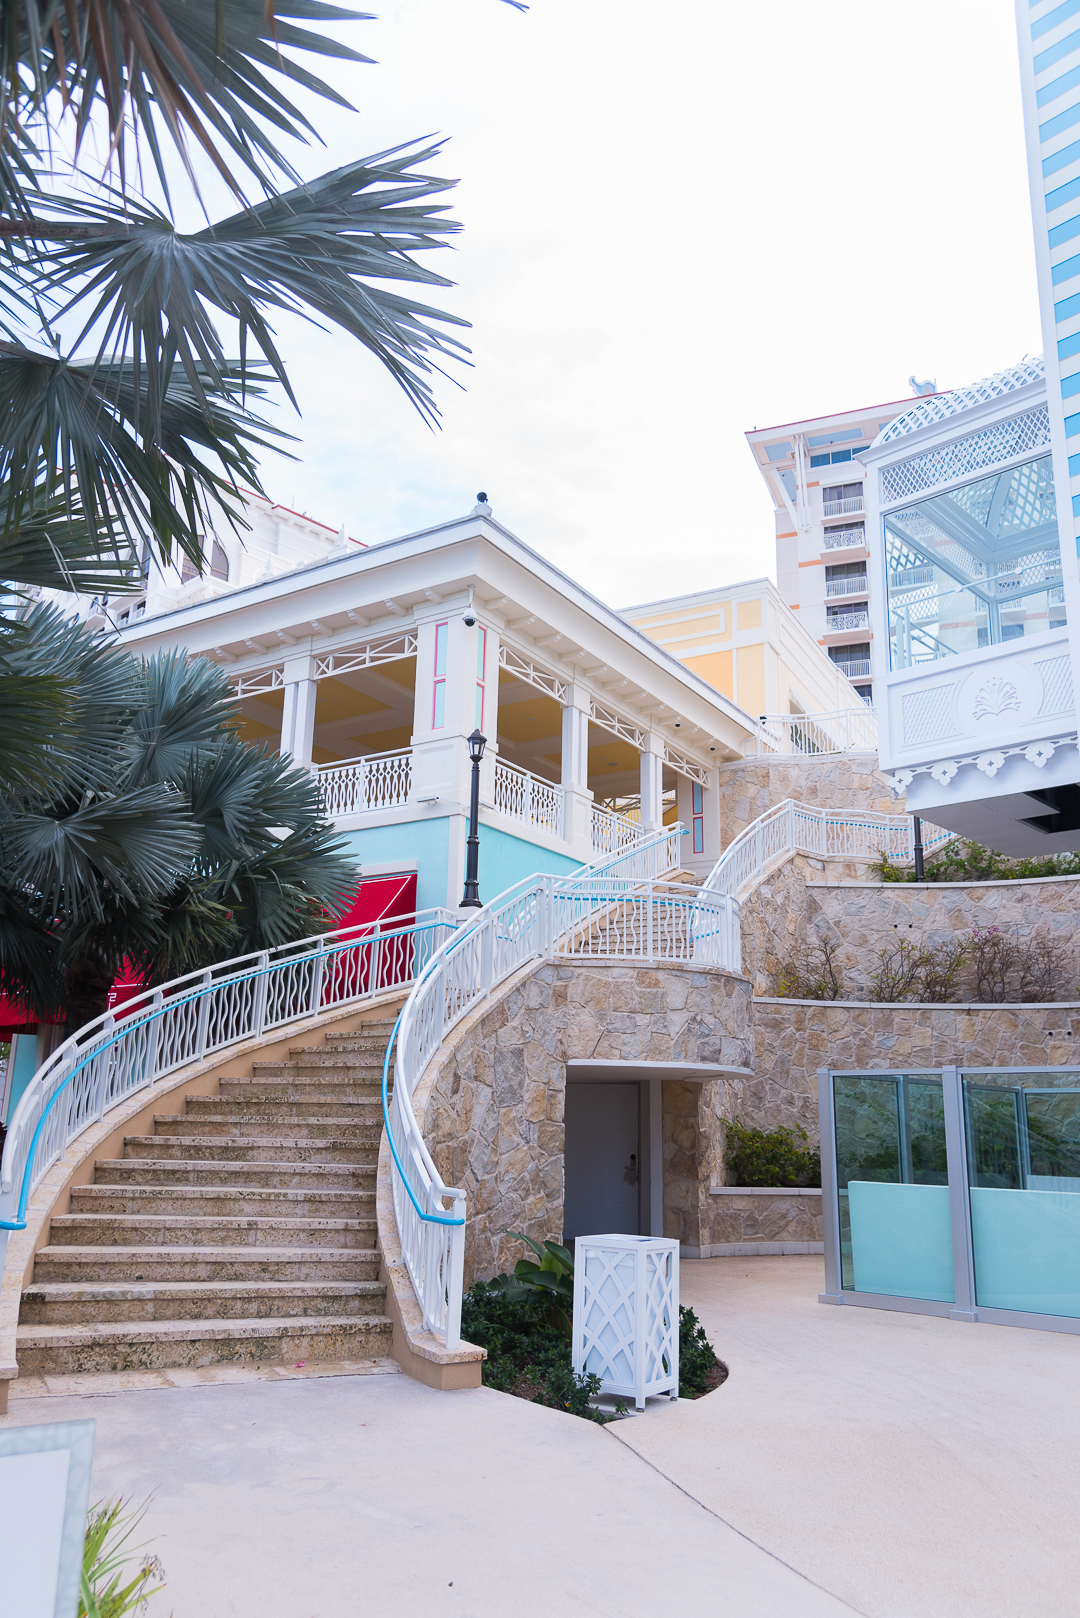 pastel colored hotels - baha mar resort review in the bahamas by popular Chicago travel blogger Visions of Vogue